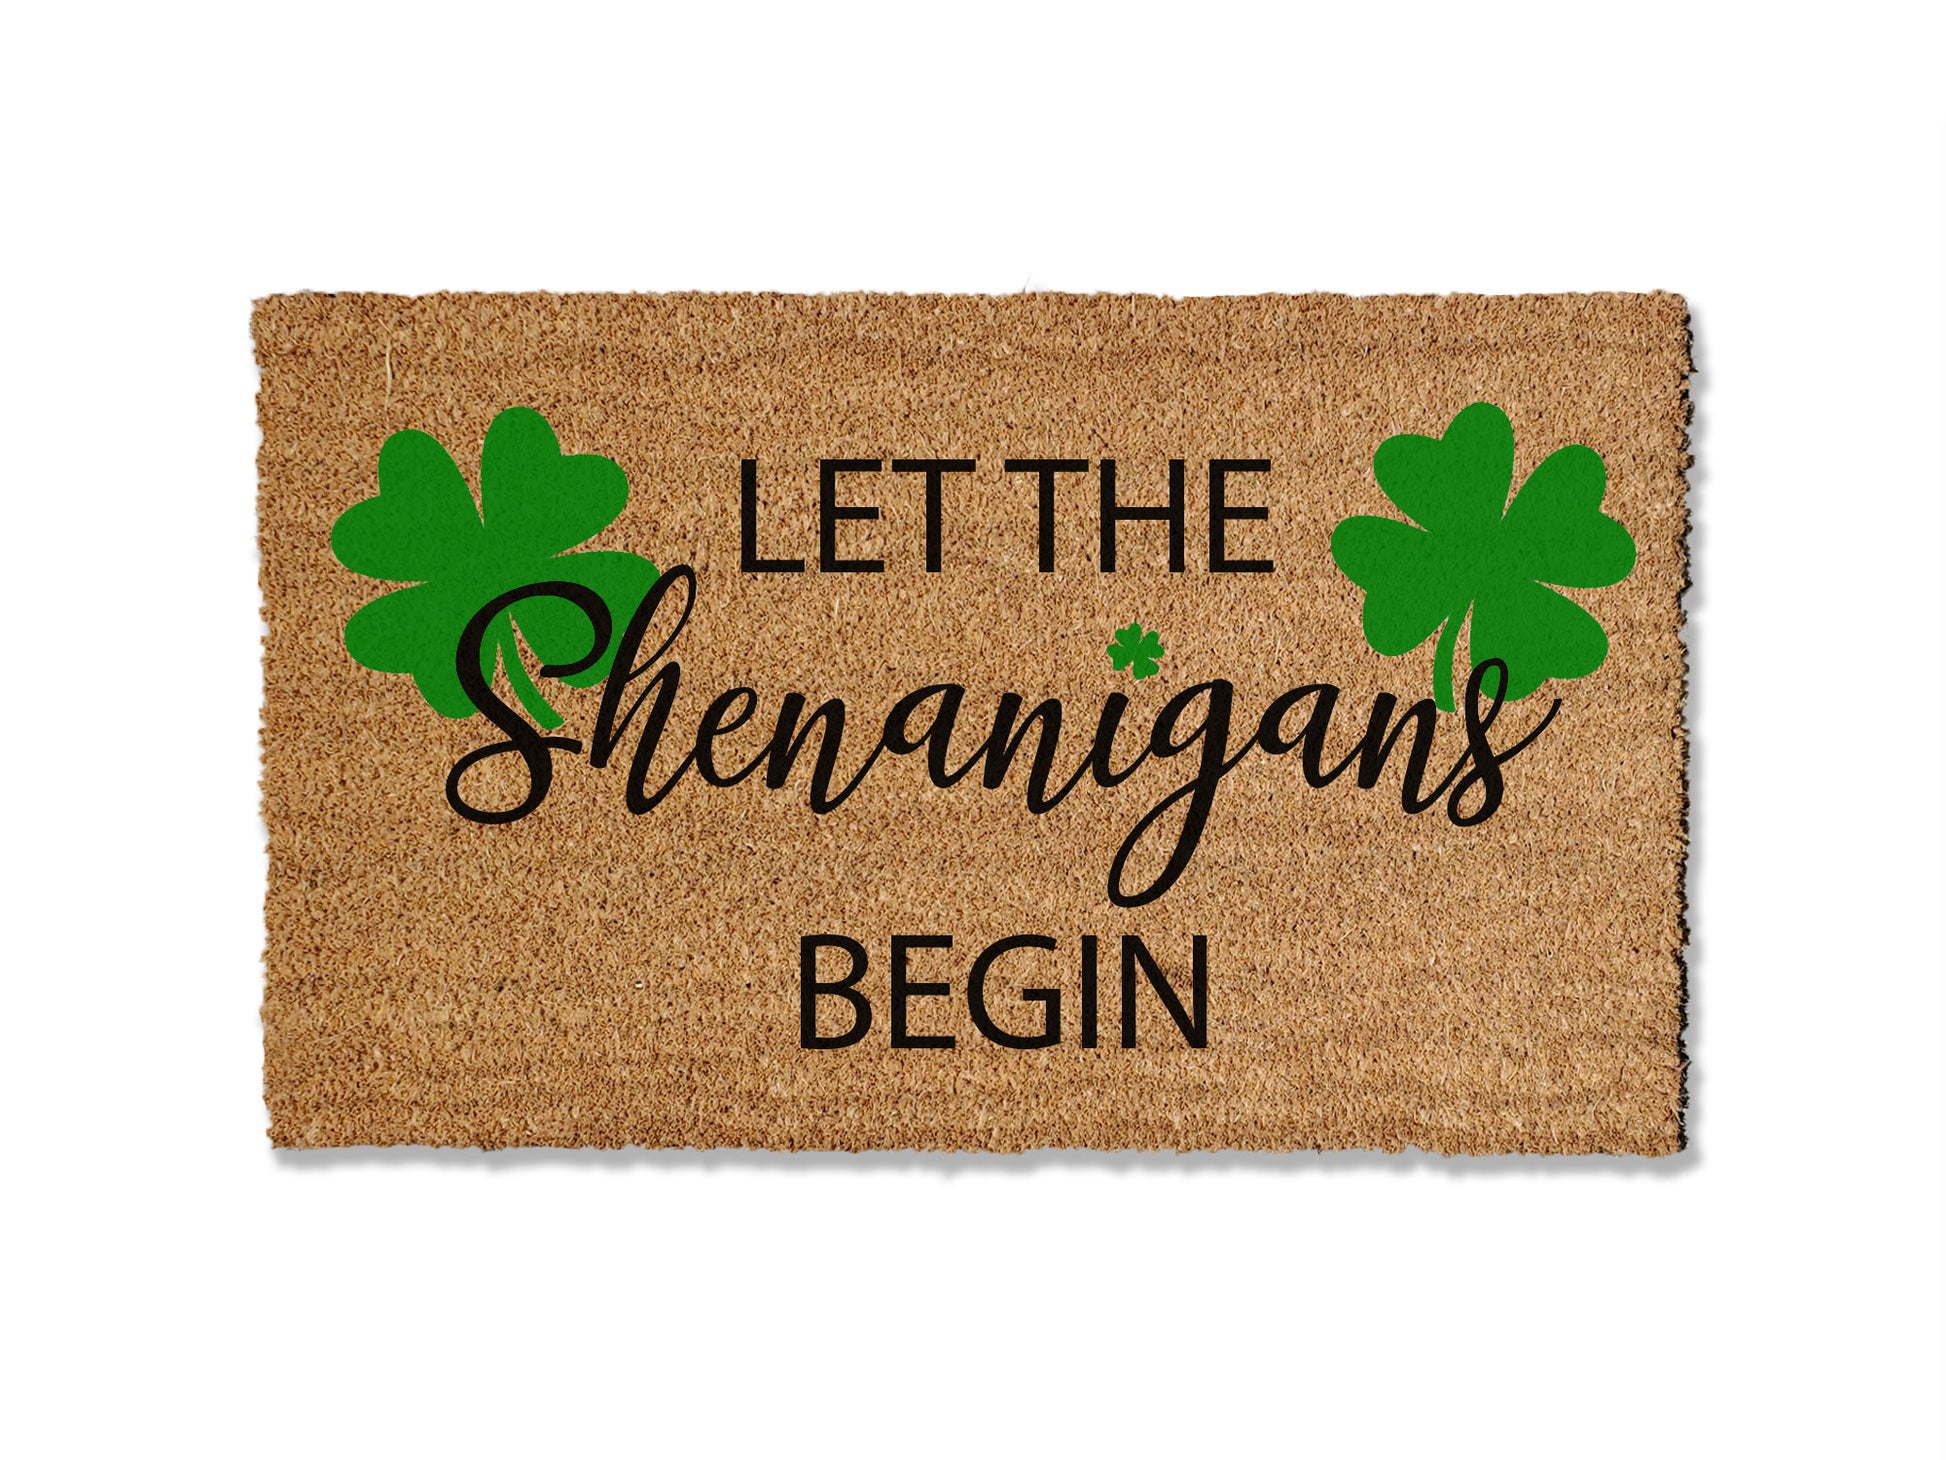 Add a touch of Irish charm to your entryway with our seasonal coir doormat featuring four-leaf clovers and the playful phrase 'Let the Shenanigans Begin.' Perfect for St. Patrick's Day, this festive design brings a whimsical flair to your doorstep. Available in multiple sizes, the mat is not only delightful but also effective at trapping dirt.